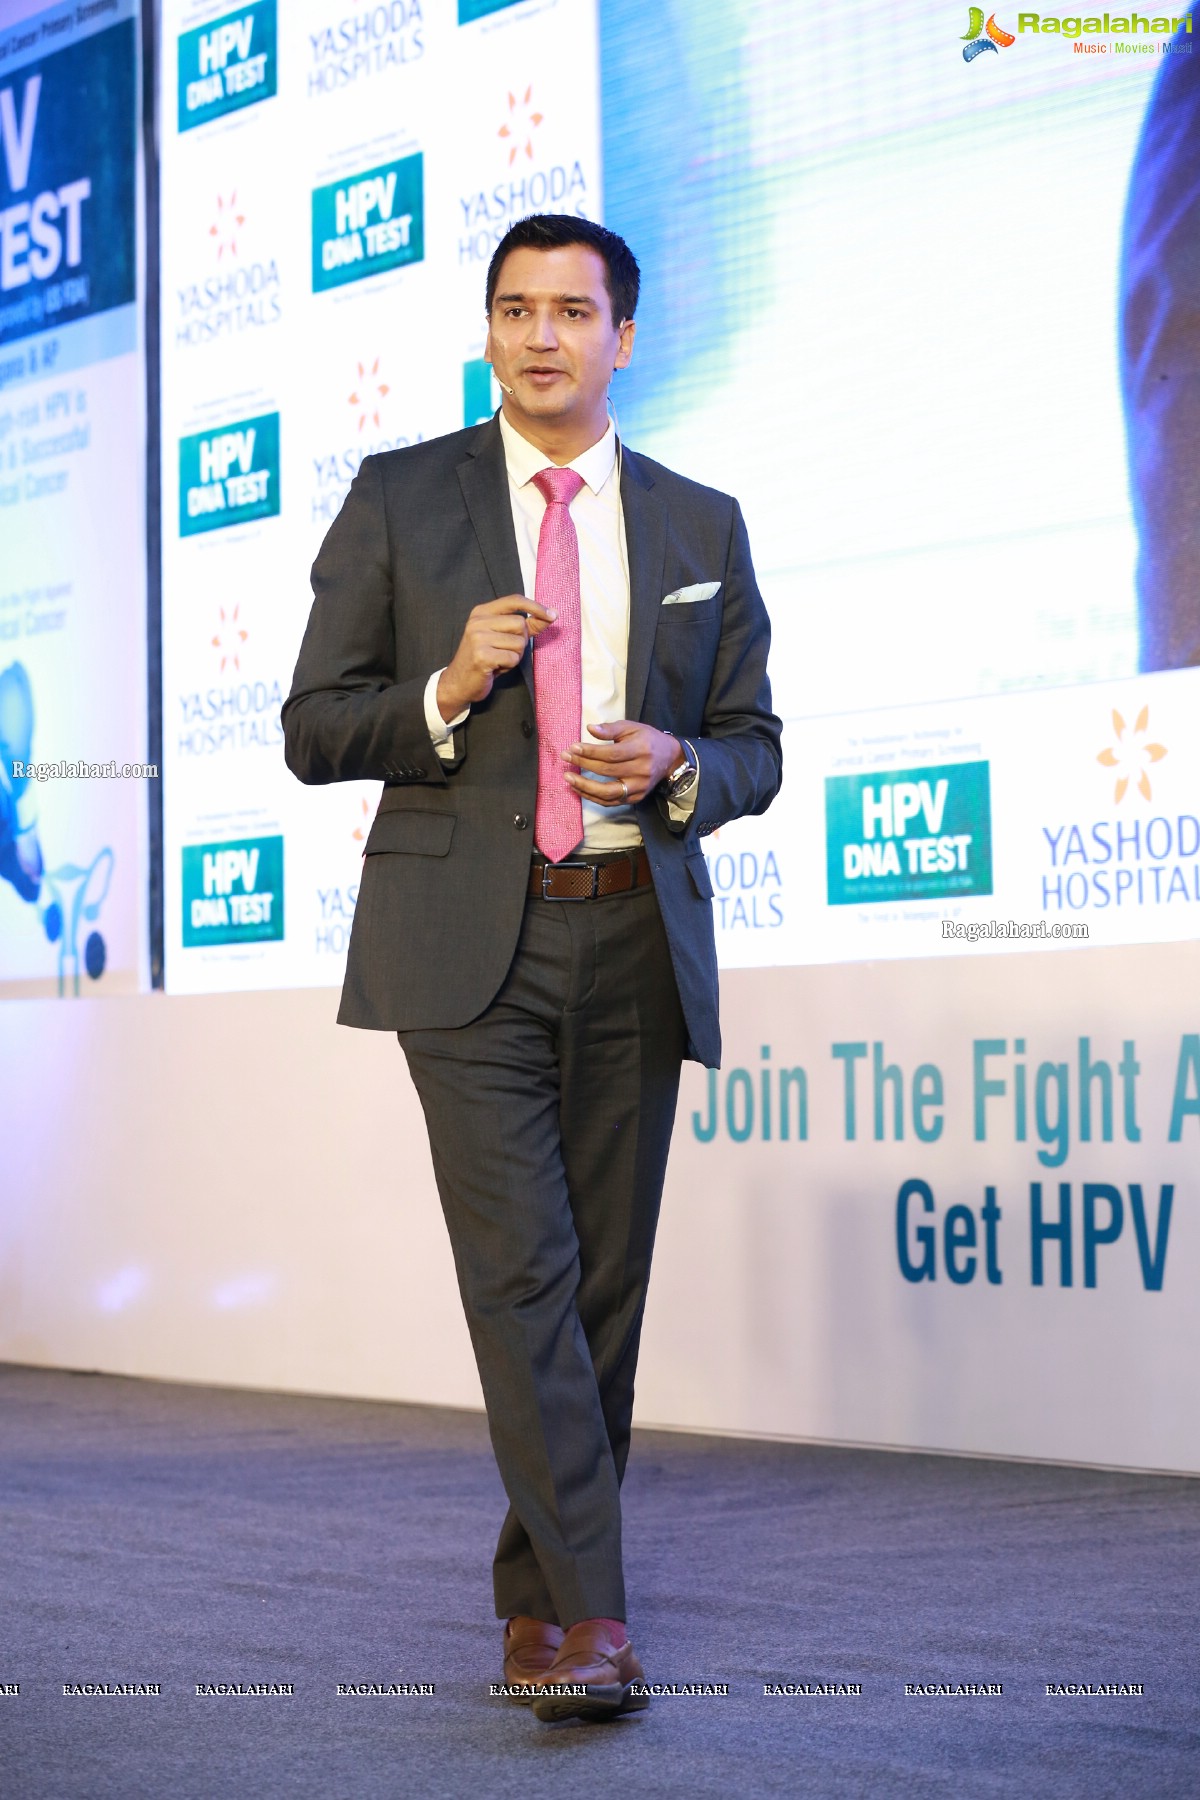 Yashoda Hospitals Launch The Revolutionary Technology HPV DNA TEST at Hotel Trident